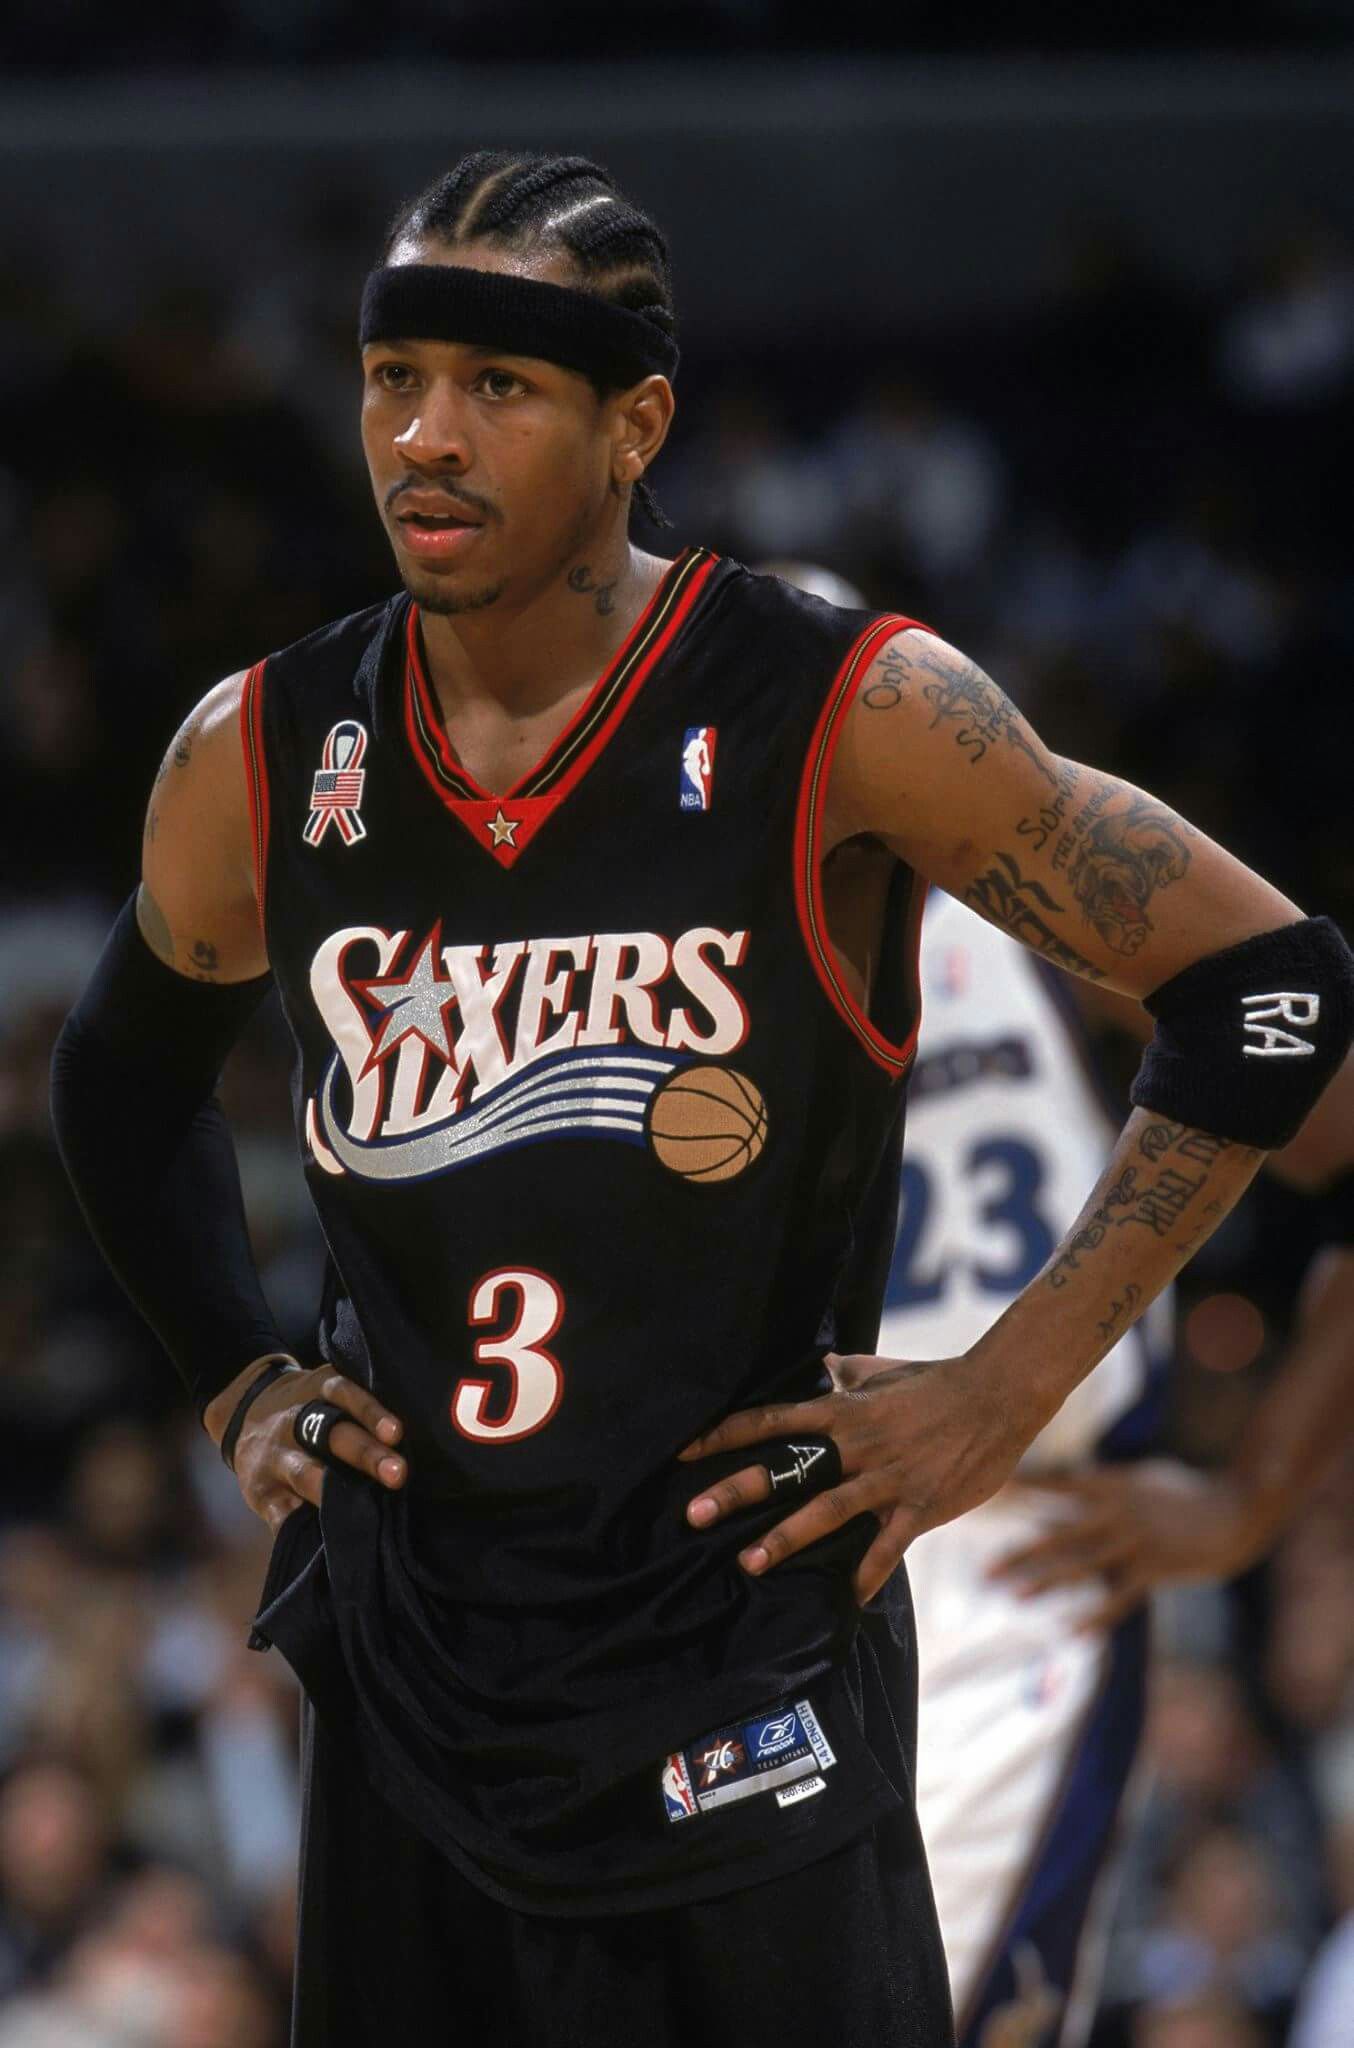 Allen Iverson - one of the best basketball players ever